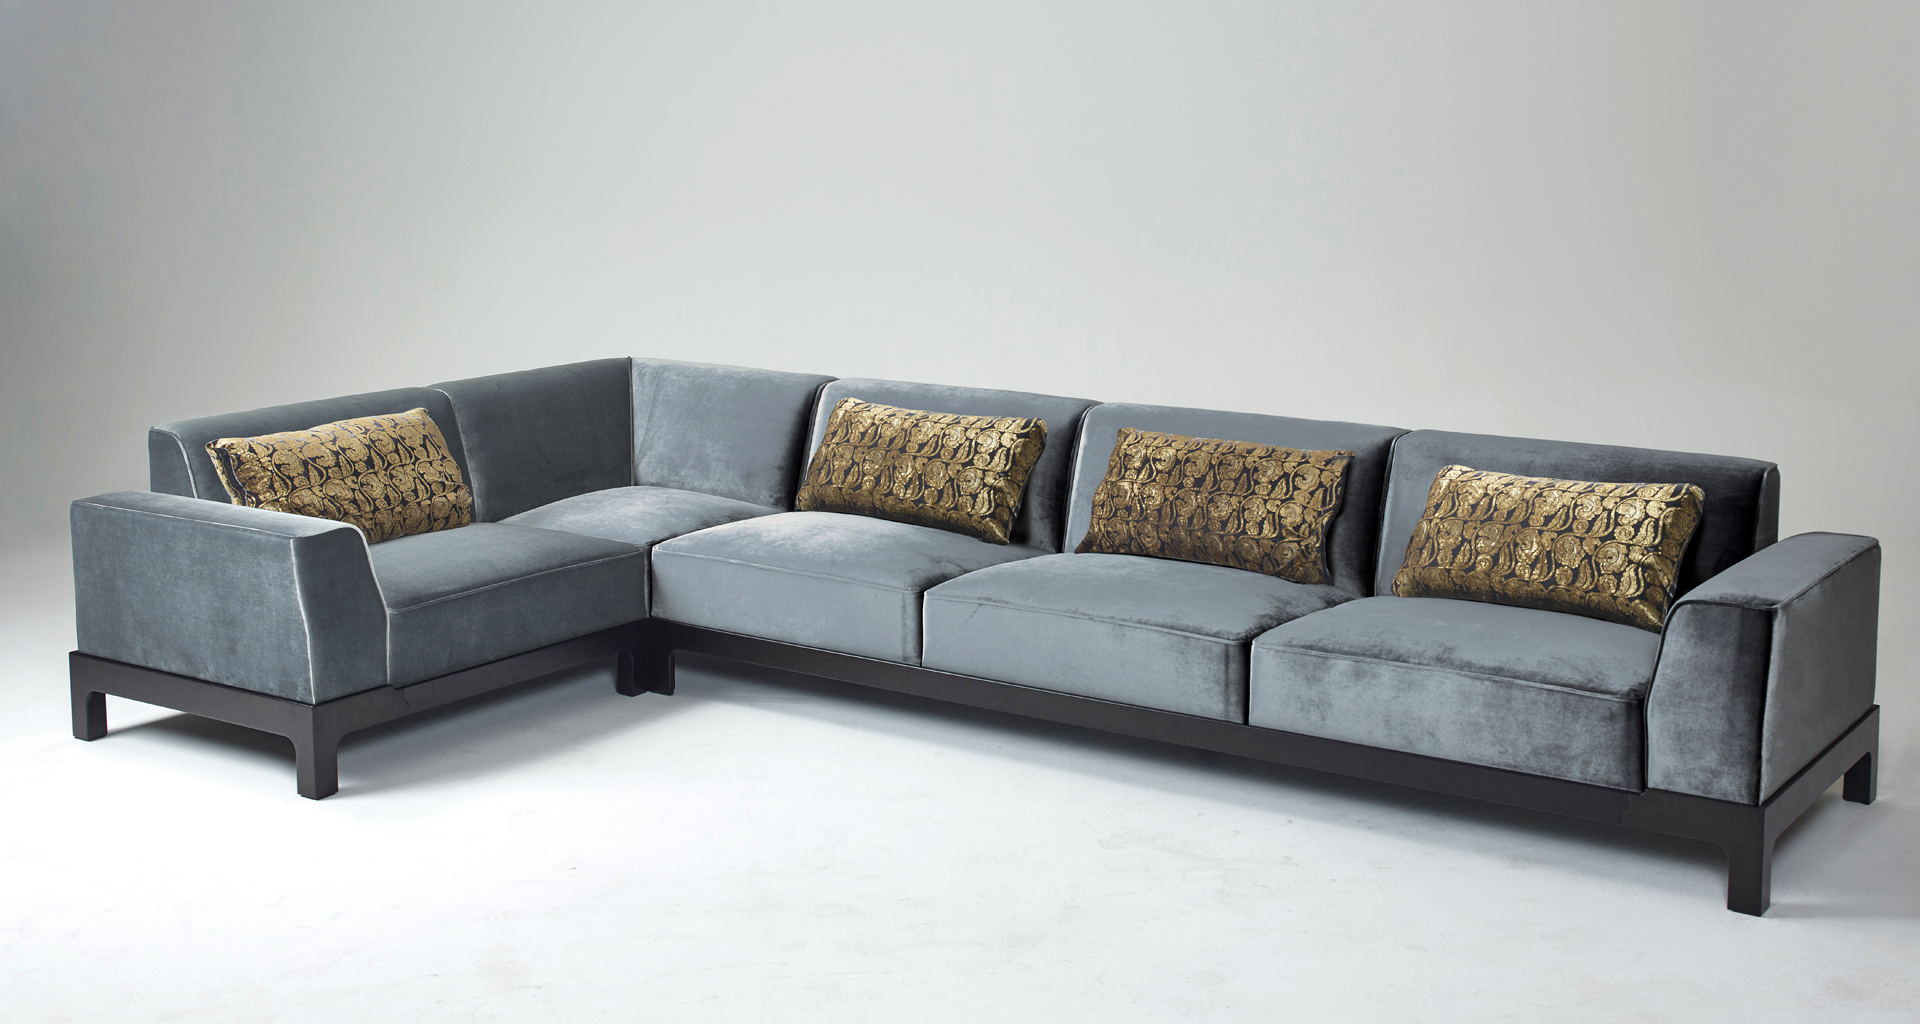 Pullman is a wooden sofa with fabric covering and cushions, from Promemoria's Indigo Tales collection | Promemoria